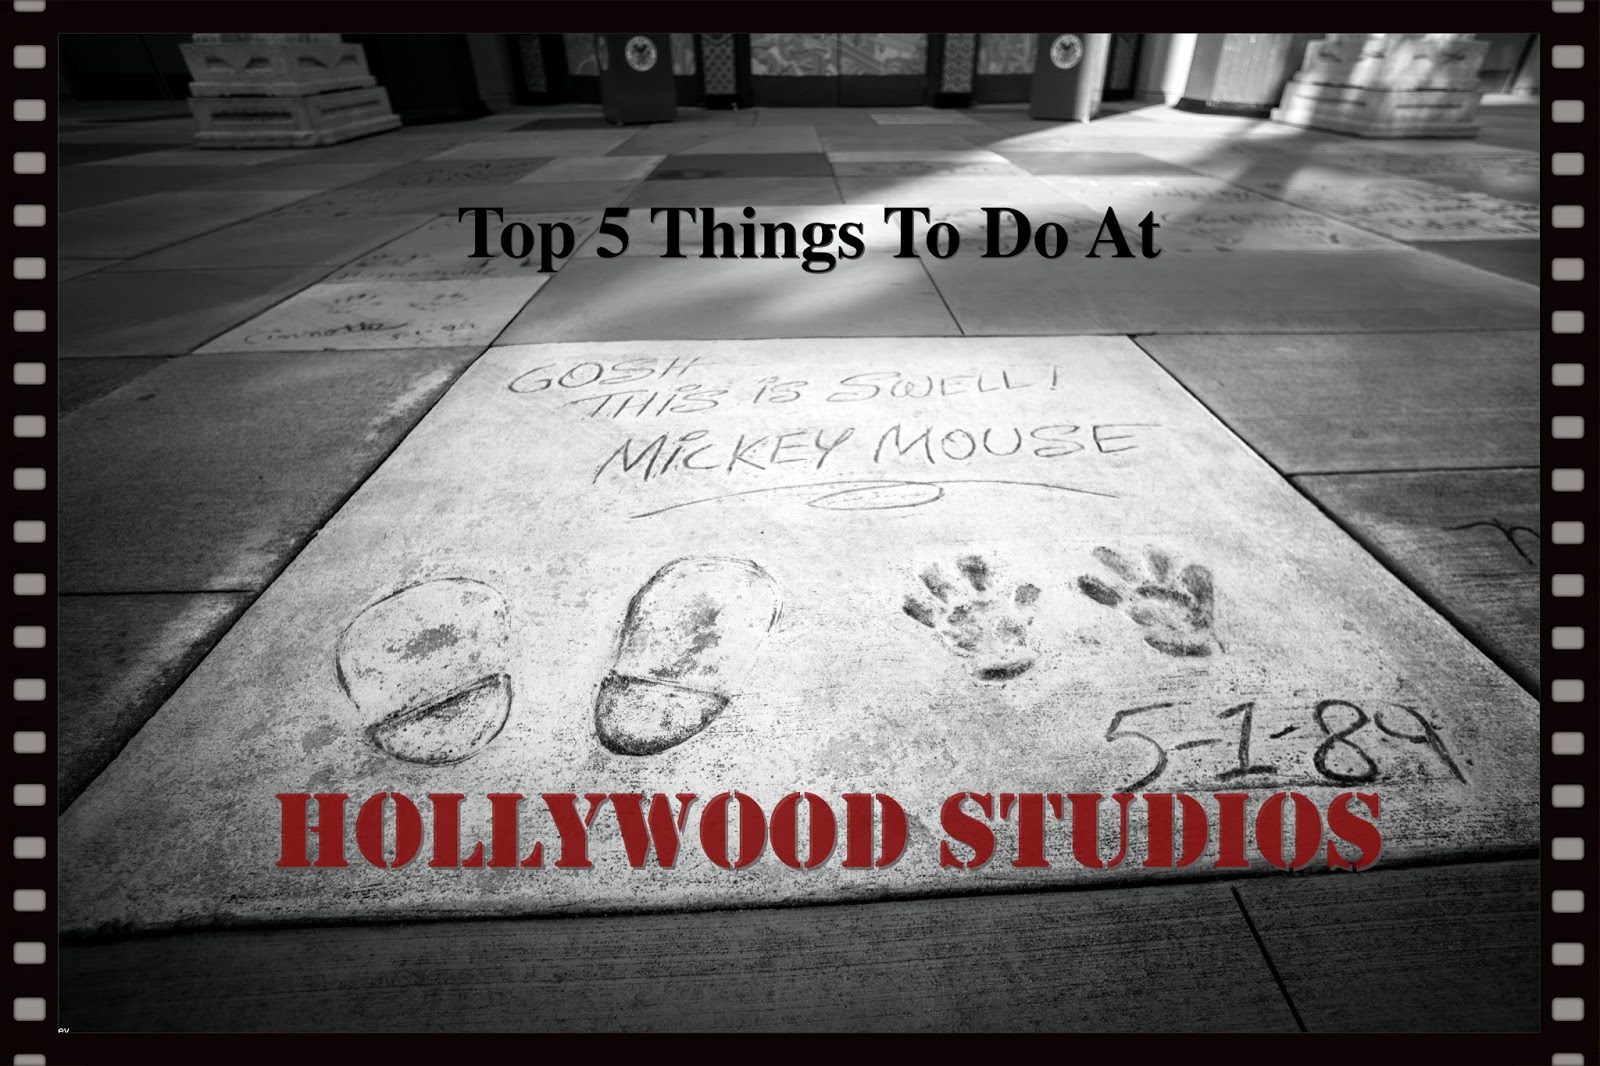 Top 5 Things To Do in Hollywood Studios